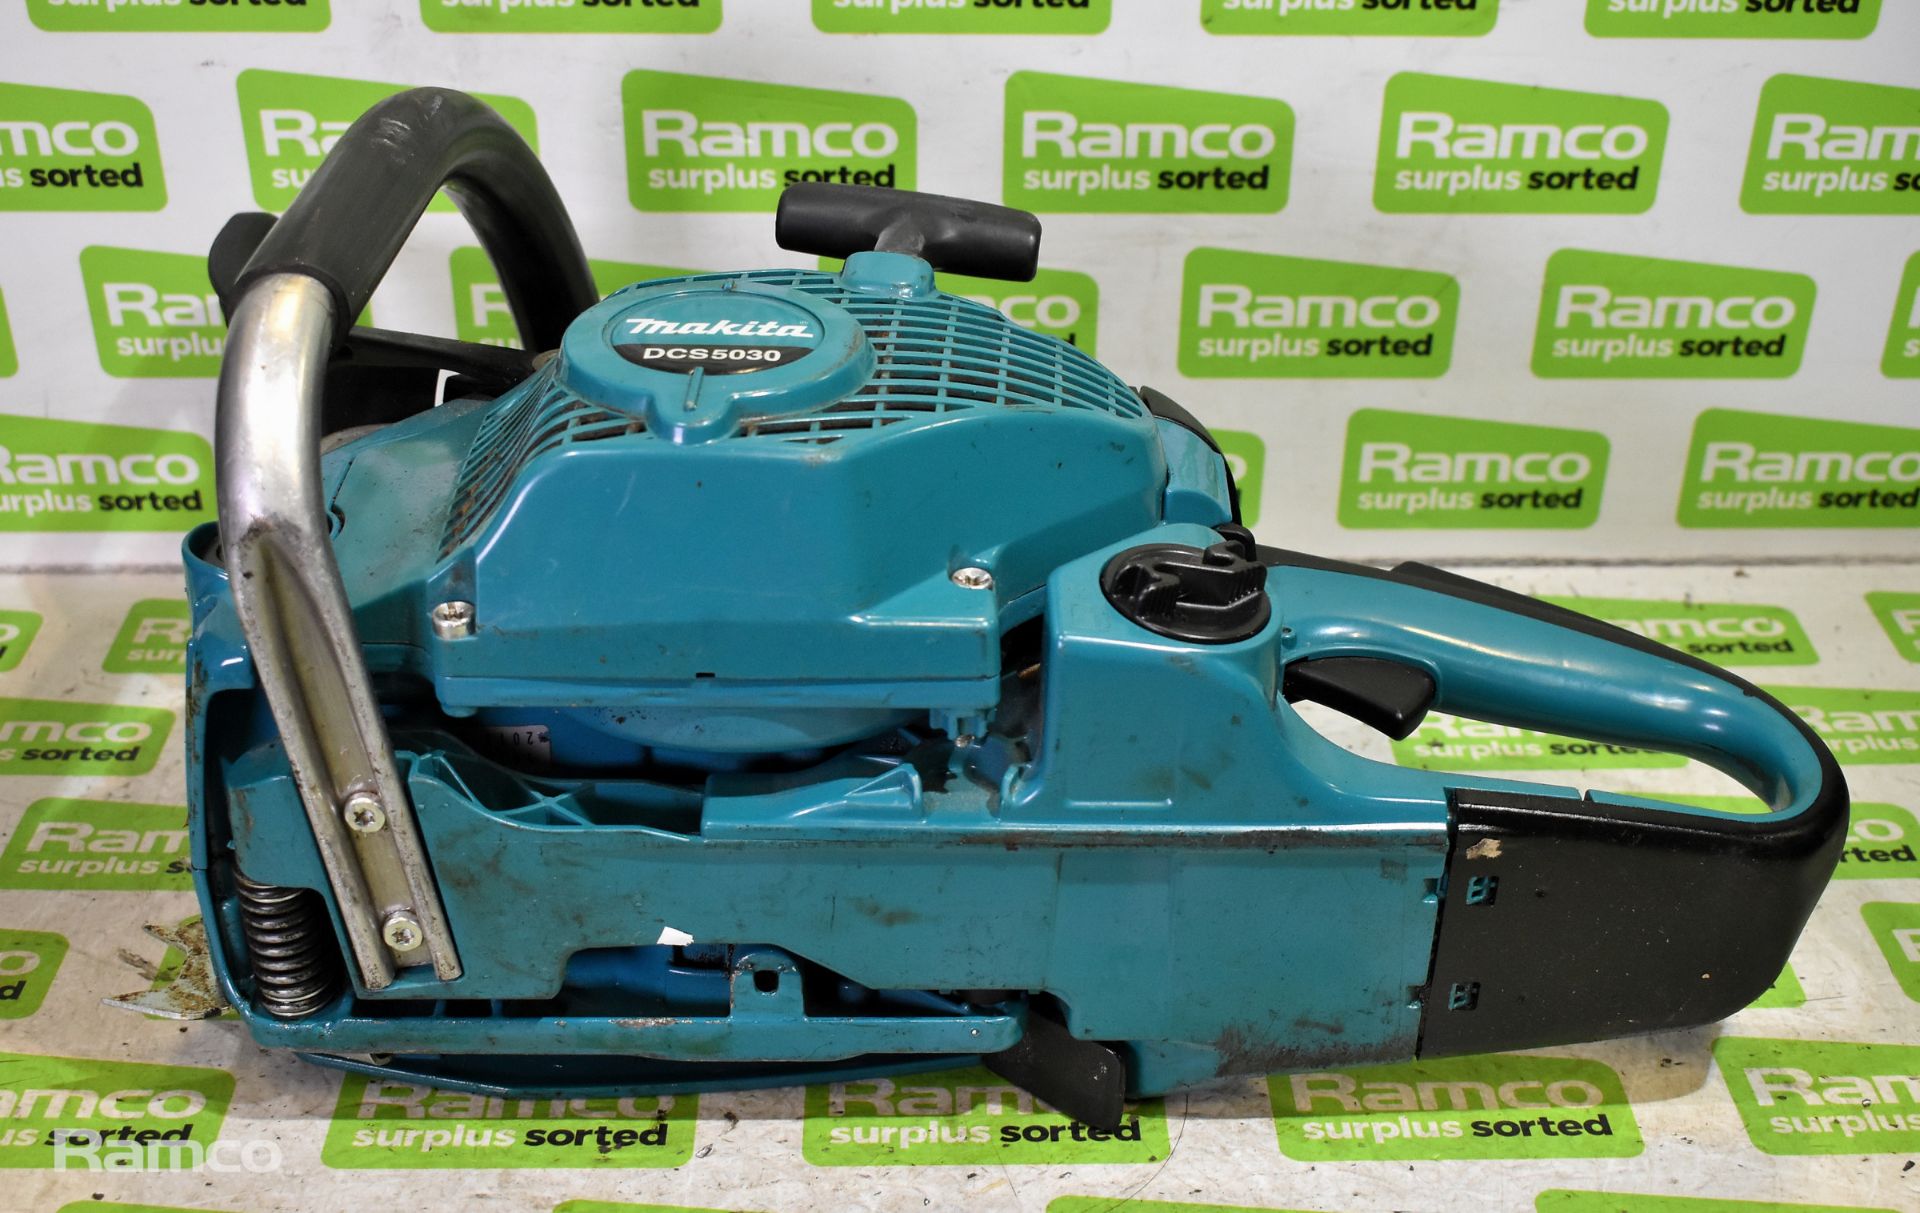 4x Makita DCS5030 50cc petrol chainsaws - BODIES ONLY - AS SPARES OR REPAIRS - Image 17 of 22